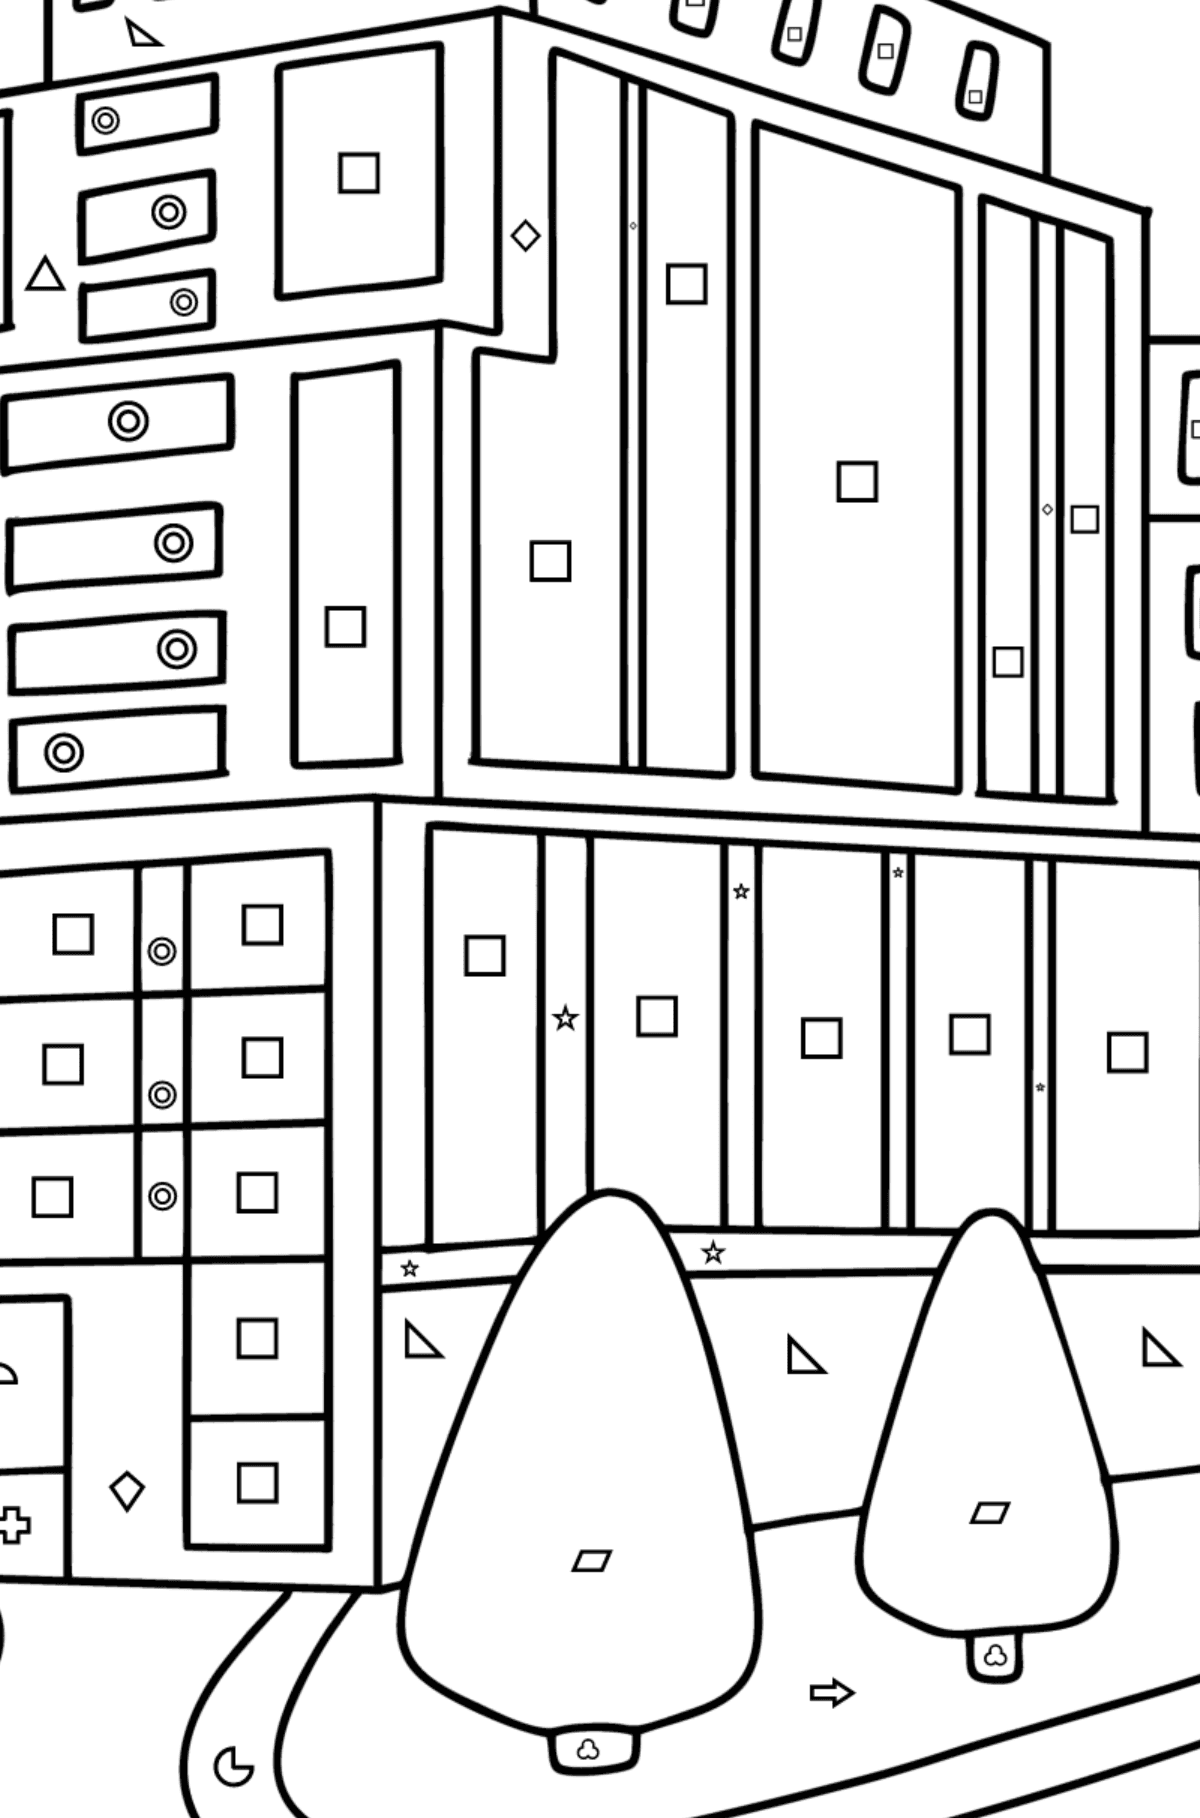 Modern Houses coloring page - Coloring by Geometric Shapes for Kids